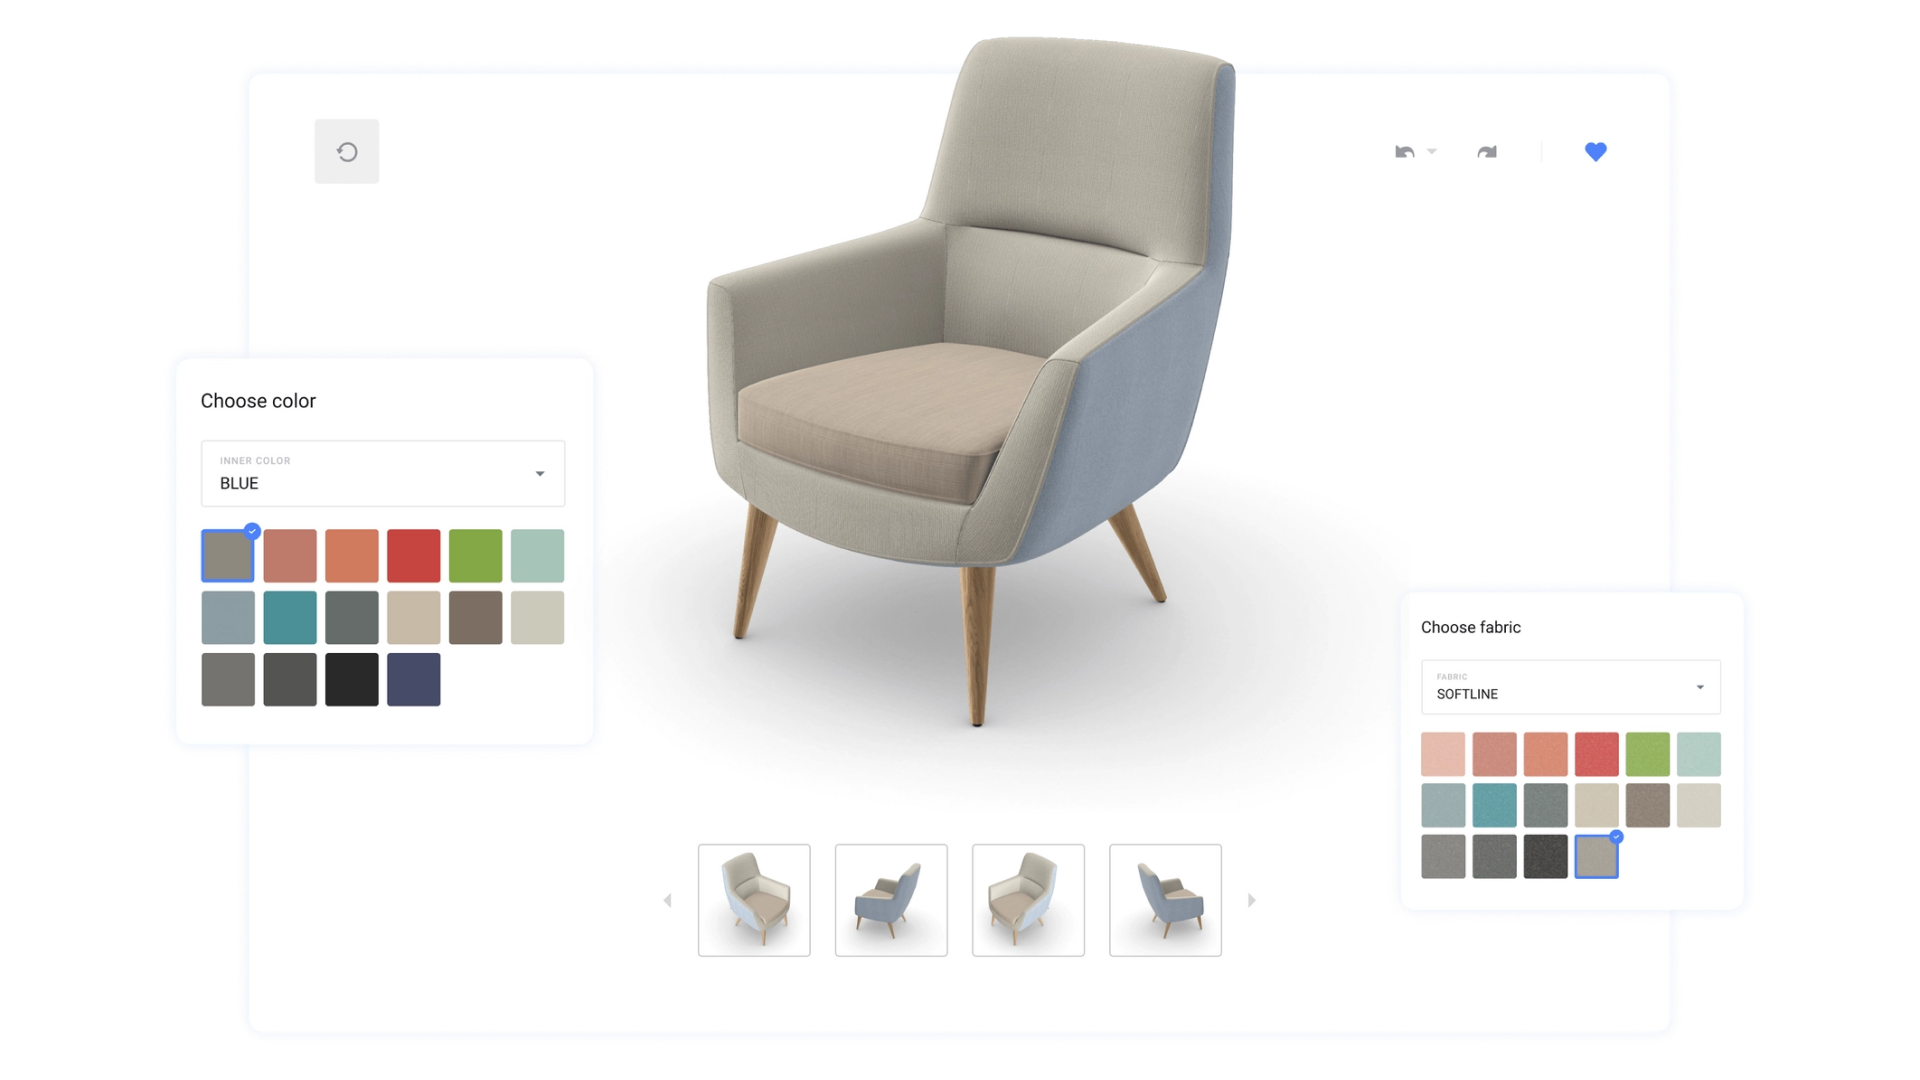 Step by step: How to create a 2D configurator for your business